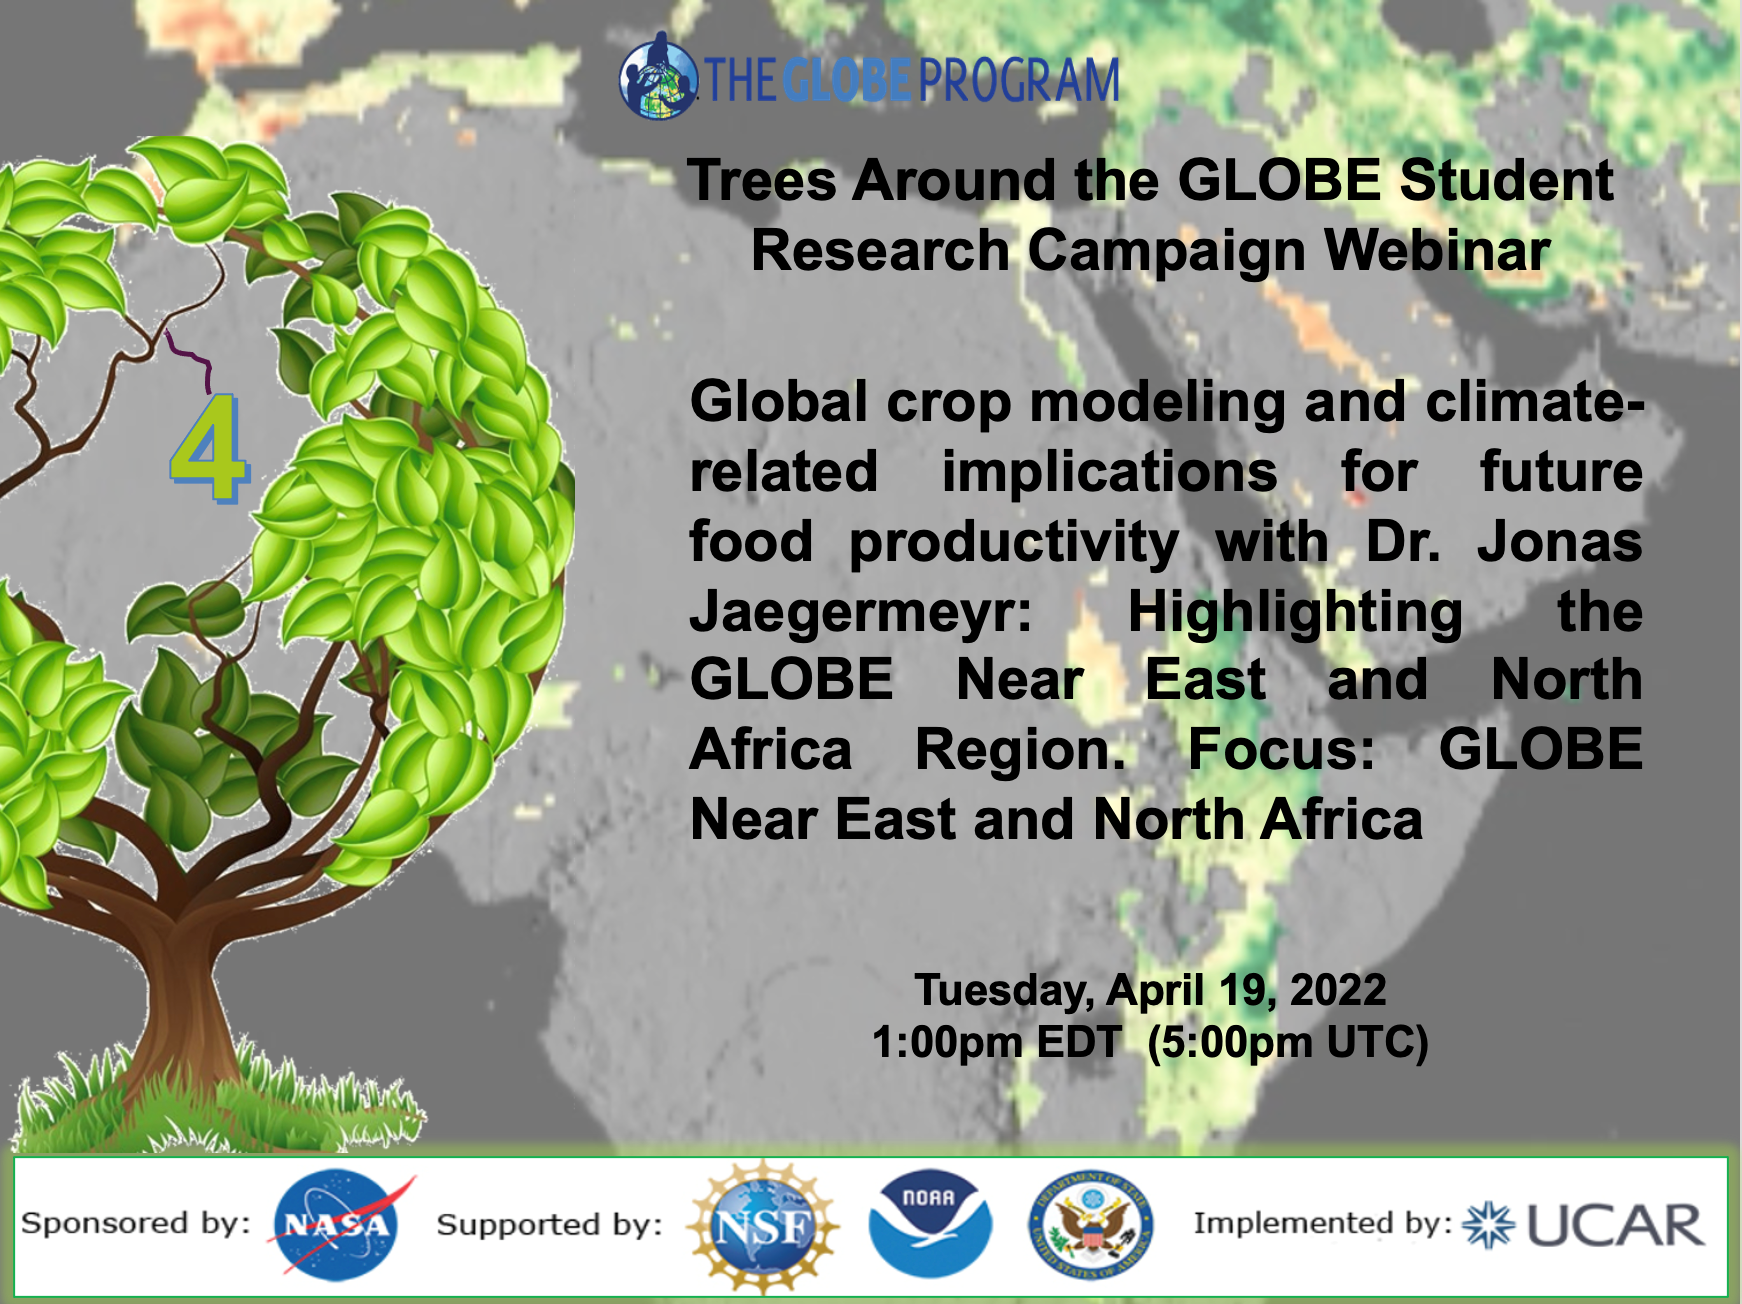 19 April Trees Around the GLOBE webinar, showing the title of the webinar